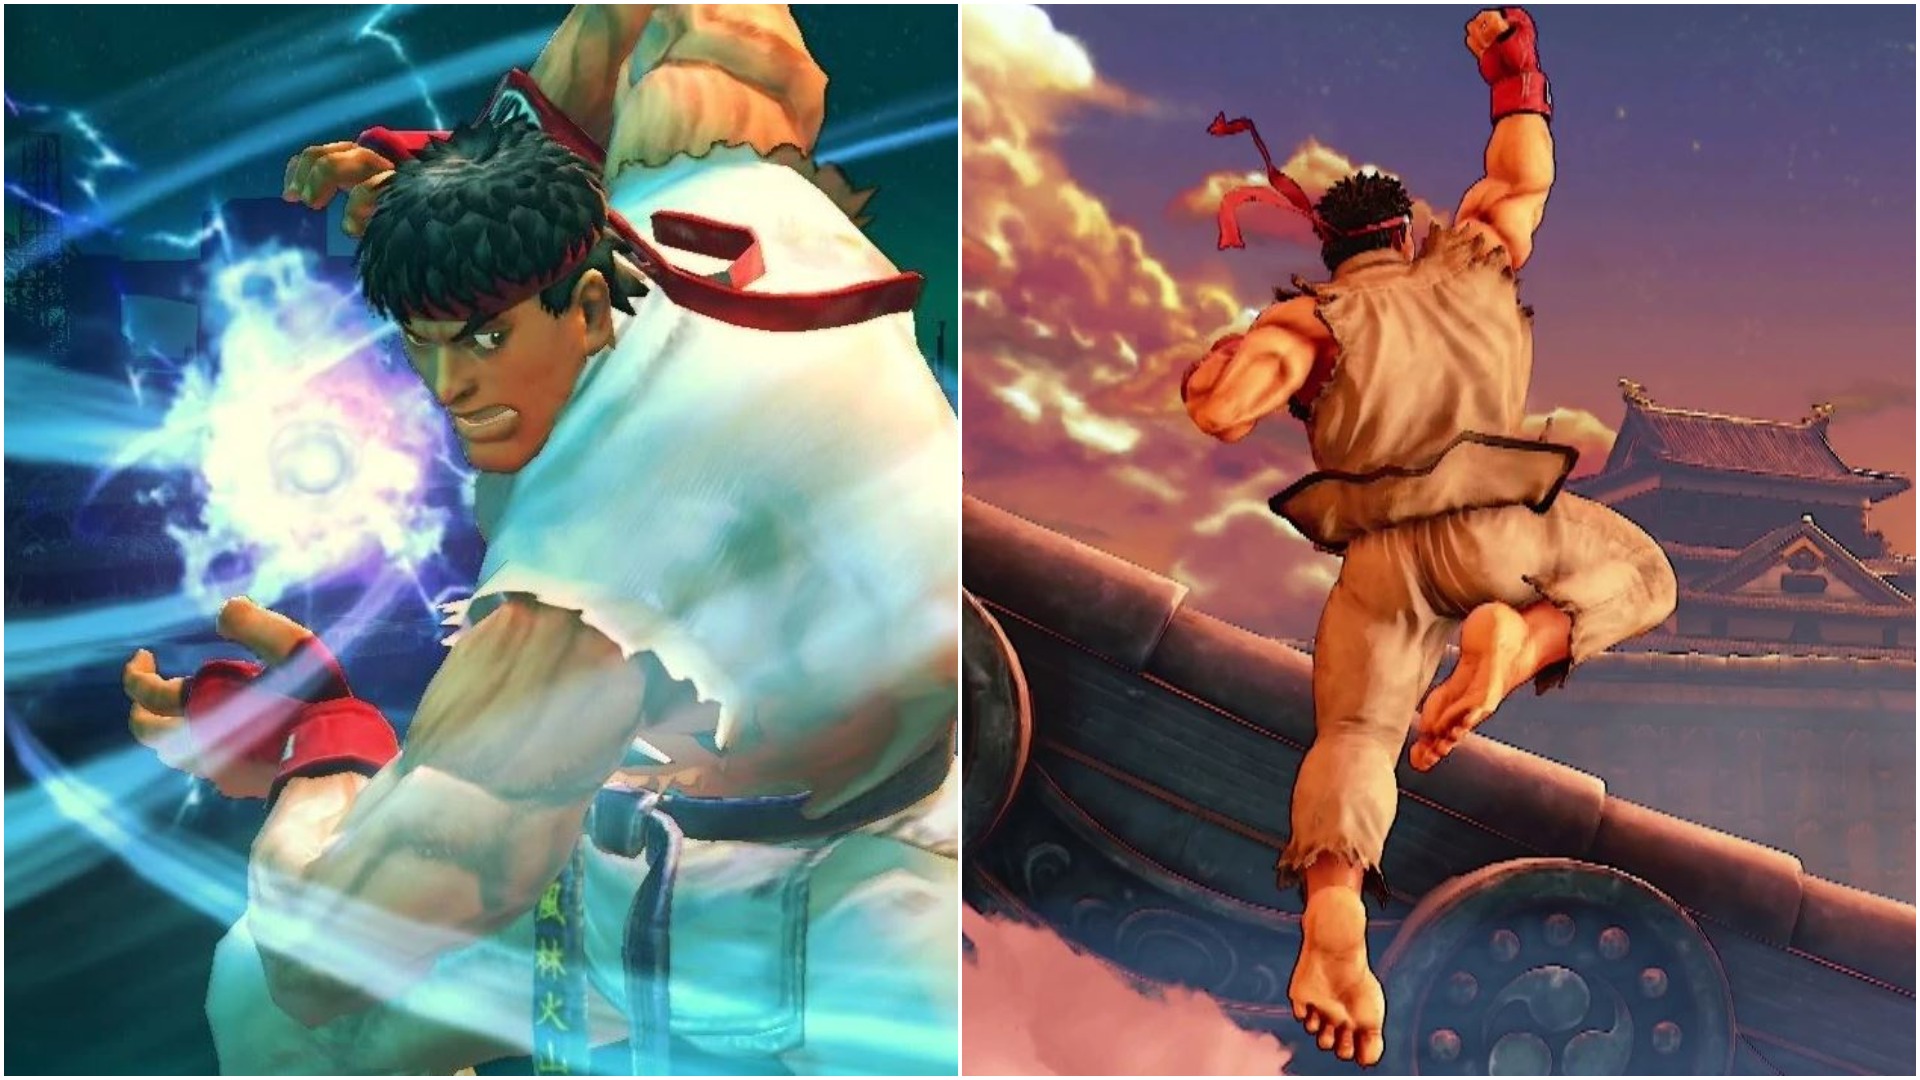 So i just saw these pics on twitter that came from the SF2 manga